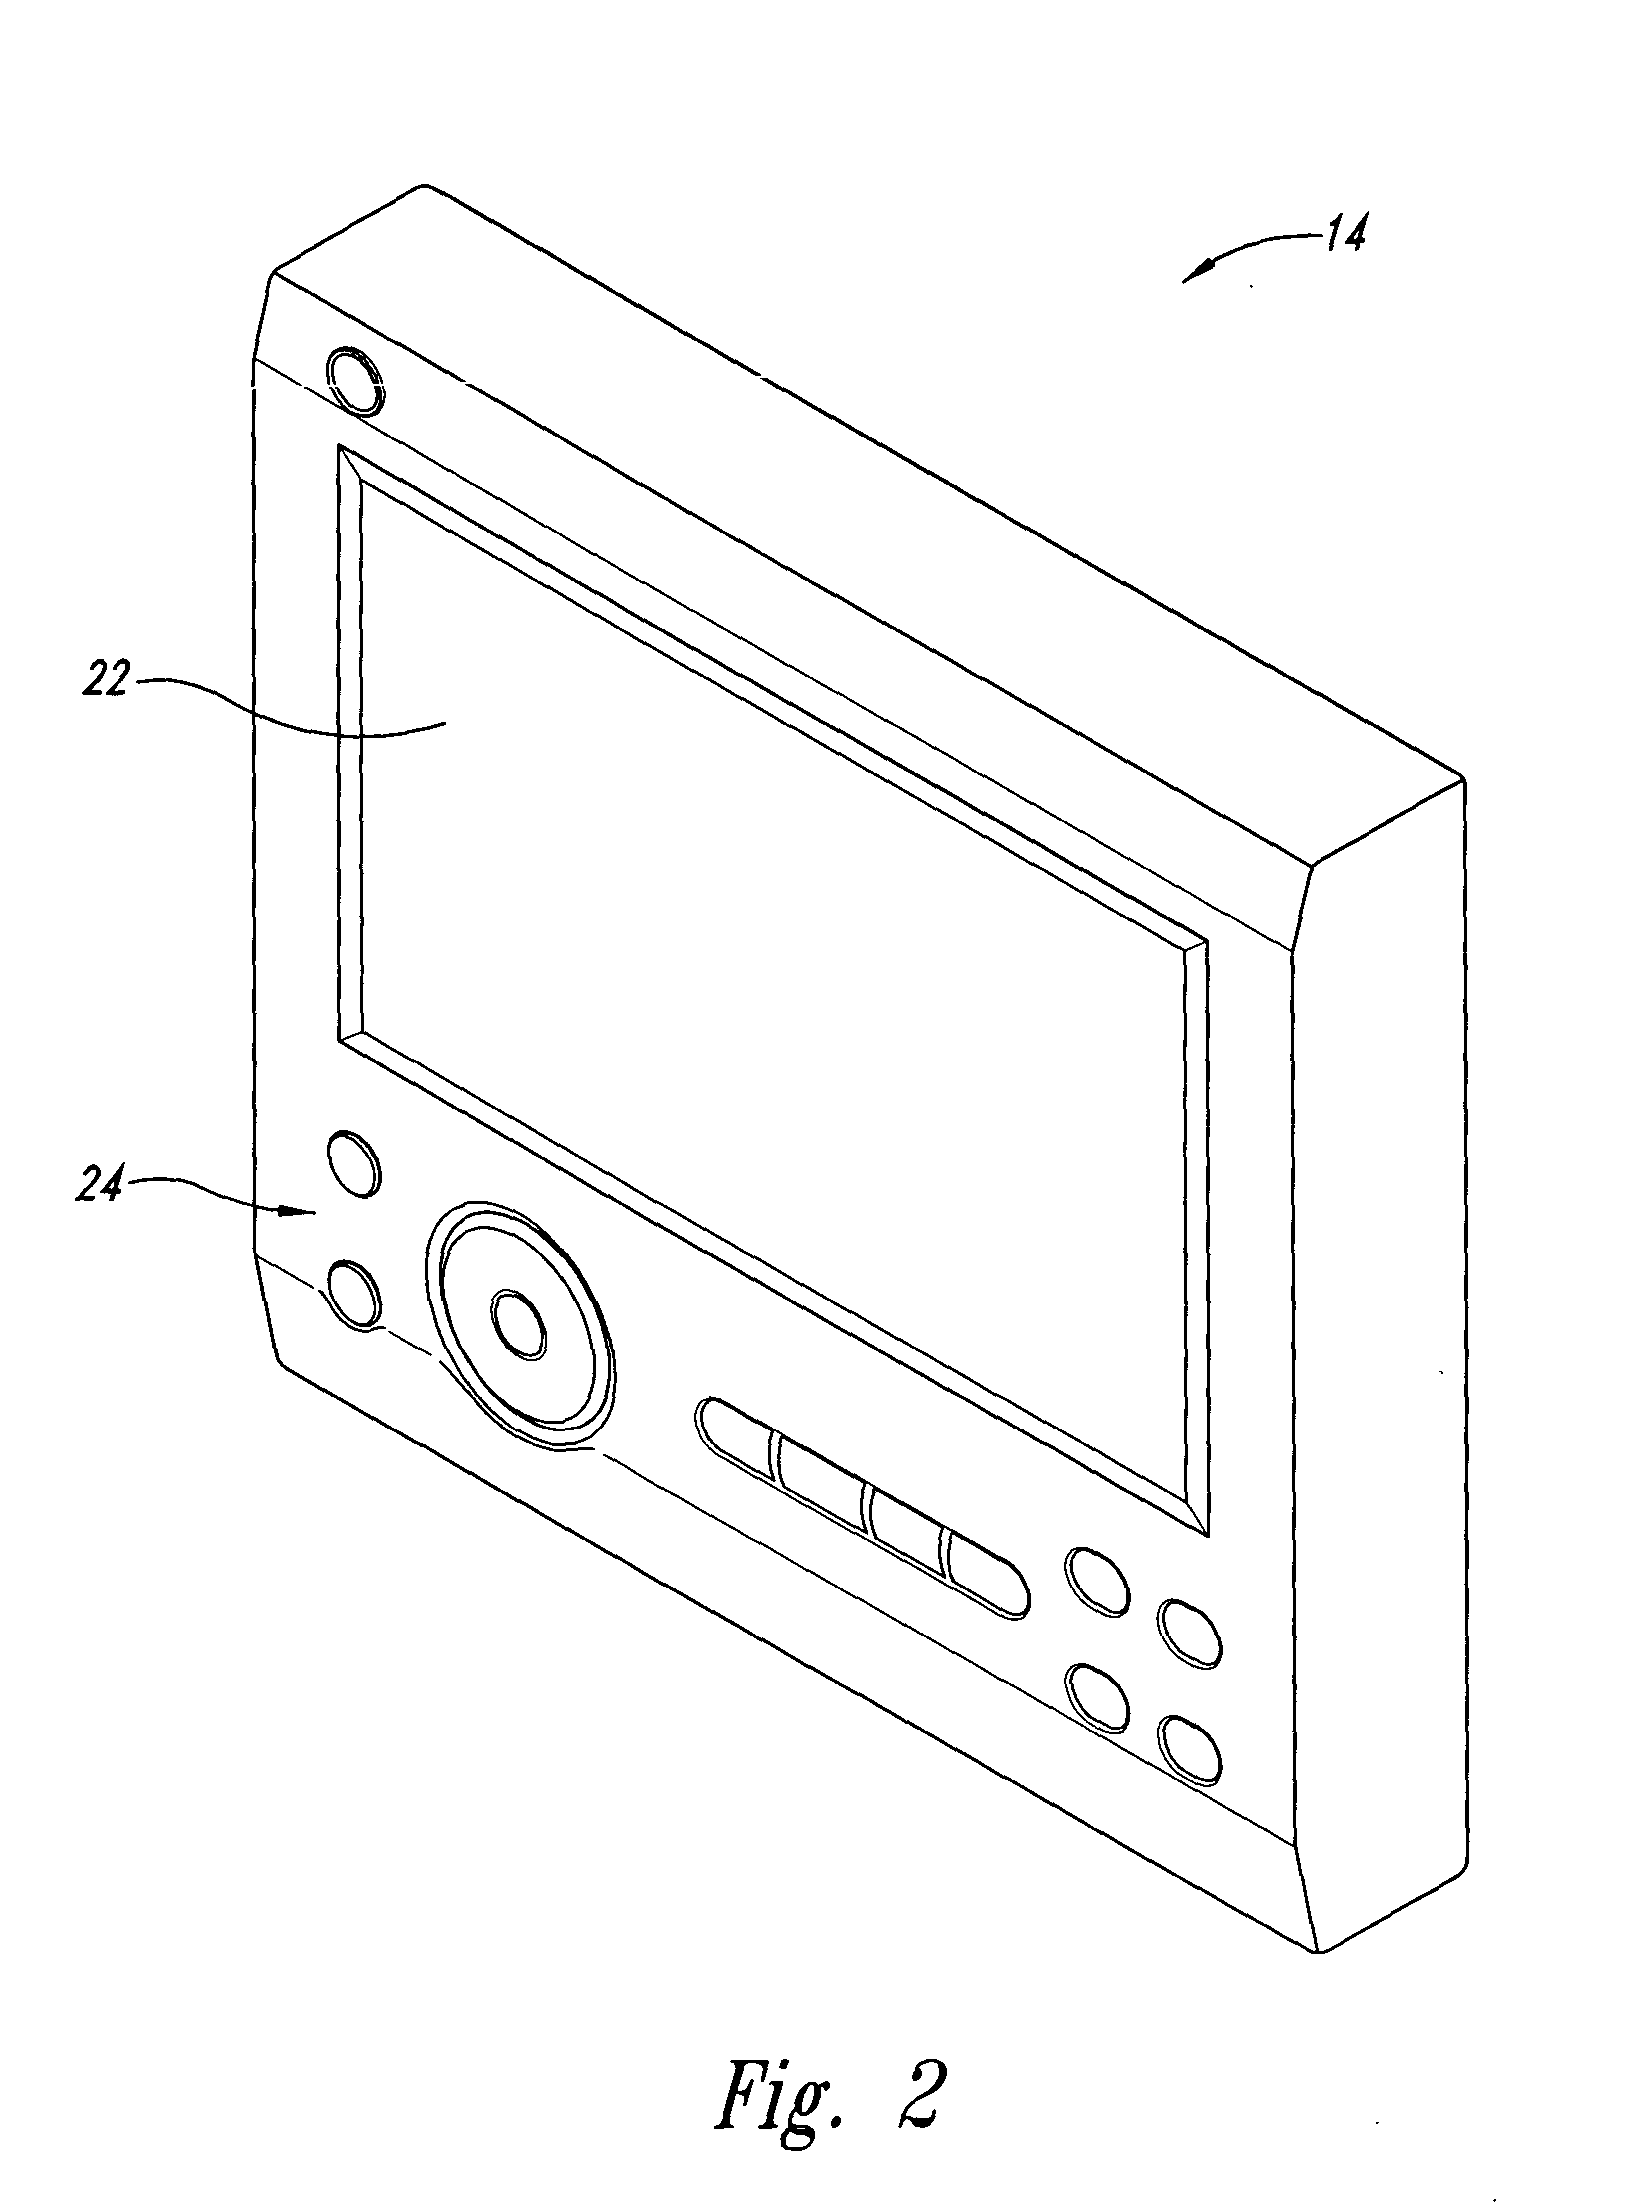 Management method of in-flight entertainment device rentals having self-contained audio-visual presentations